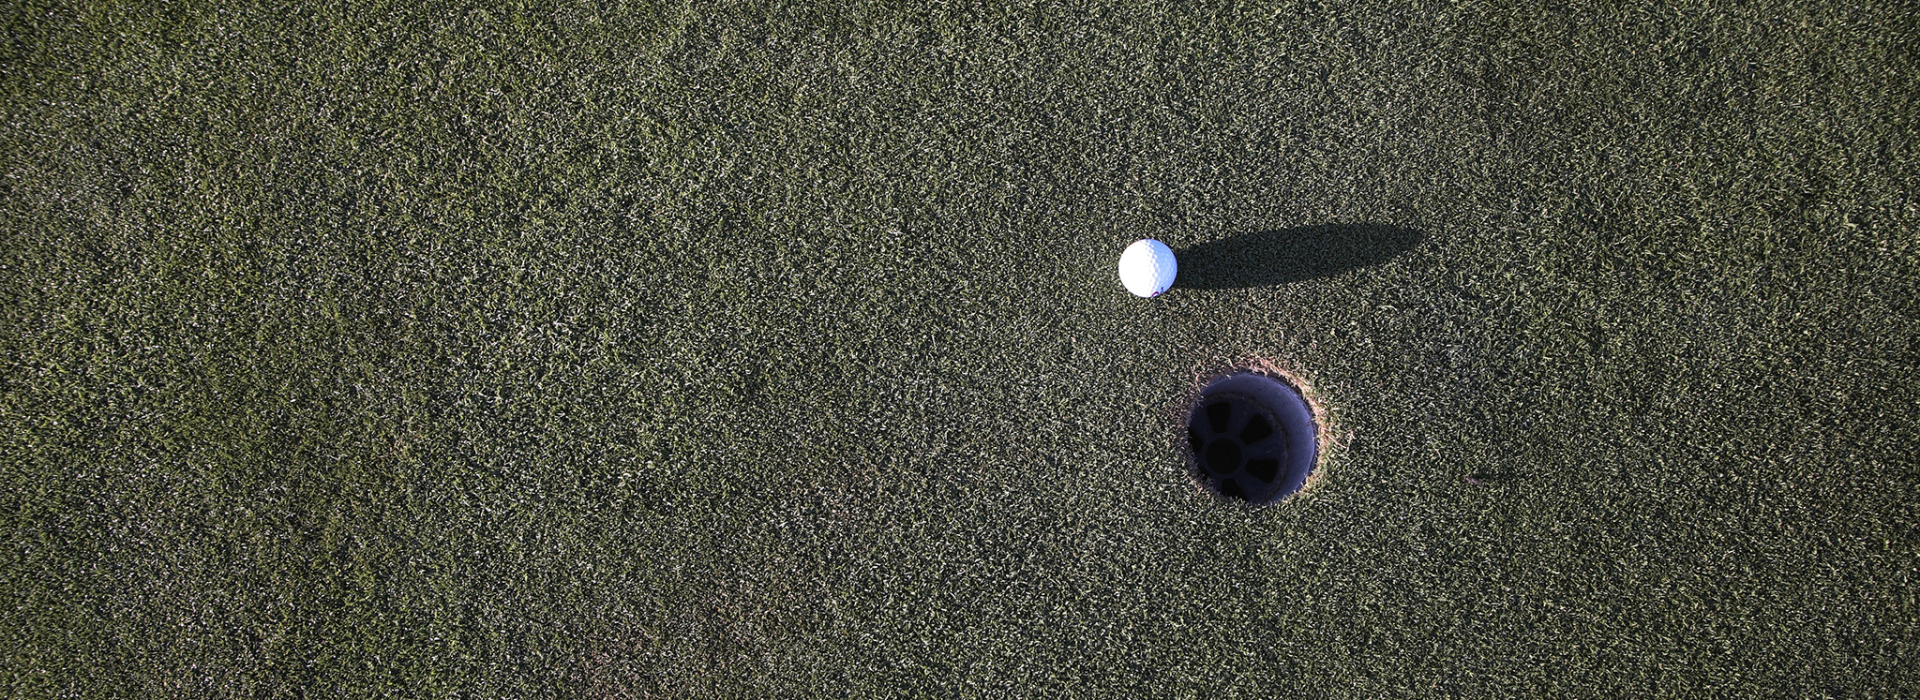 Golf ball next to hole aerial view